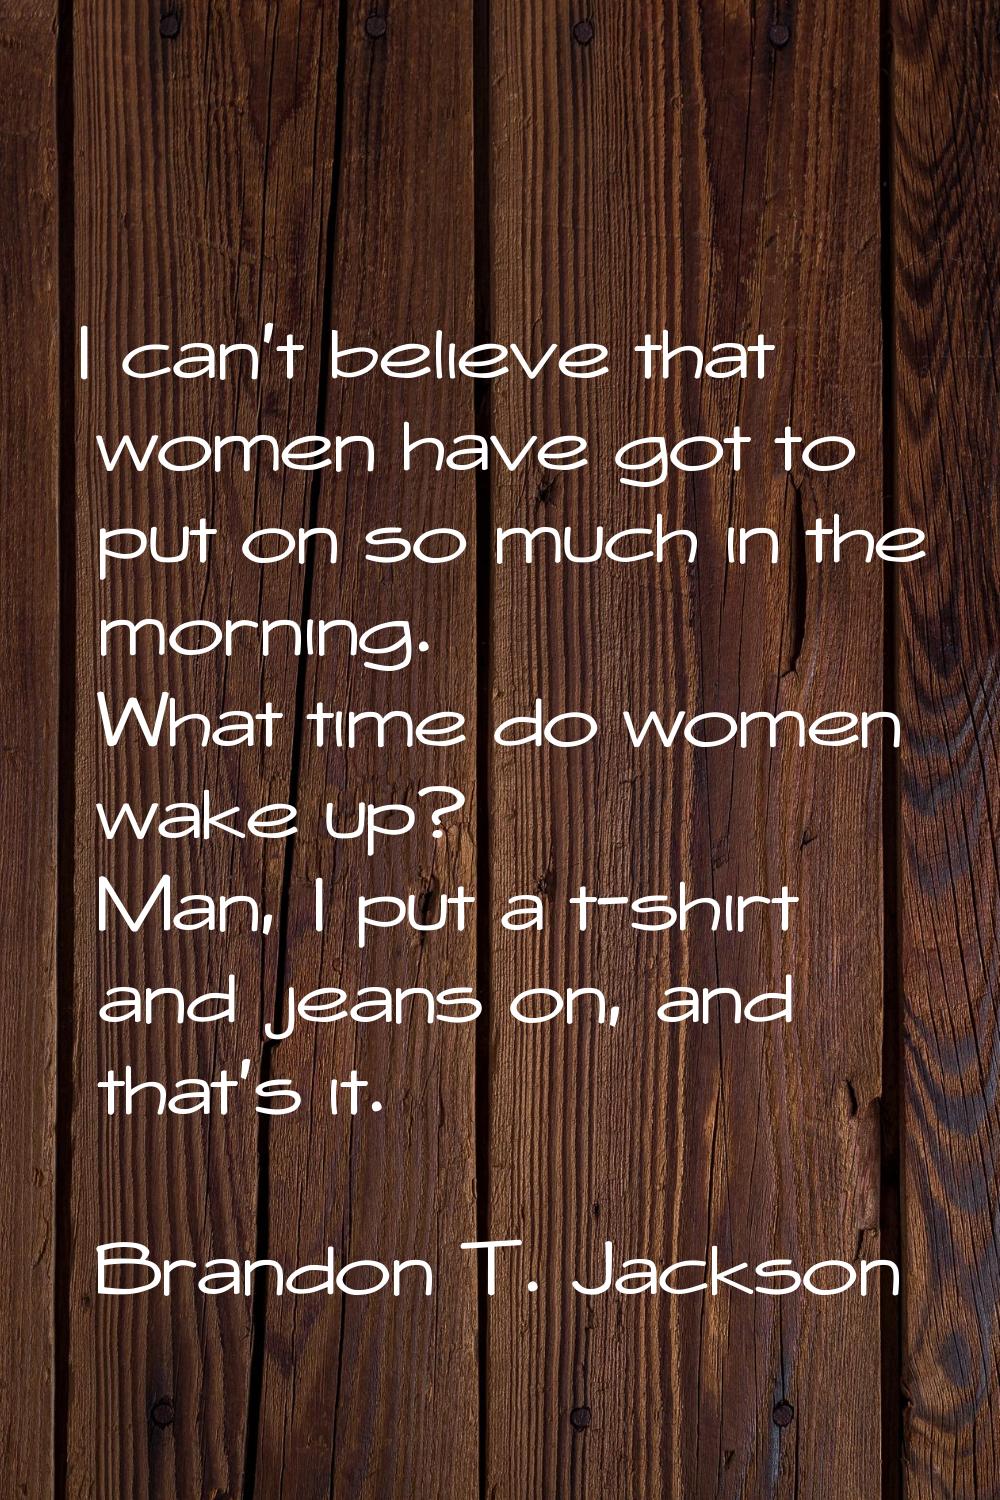 I can't believe that women have got to put on so much in the morning. What time do women wake up? M